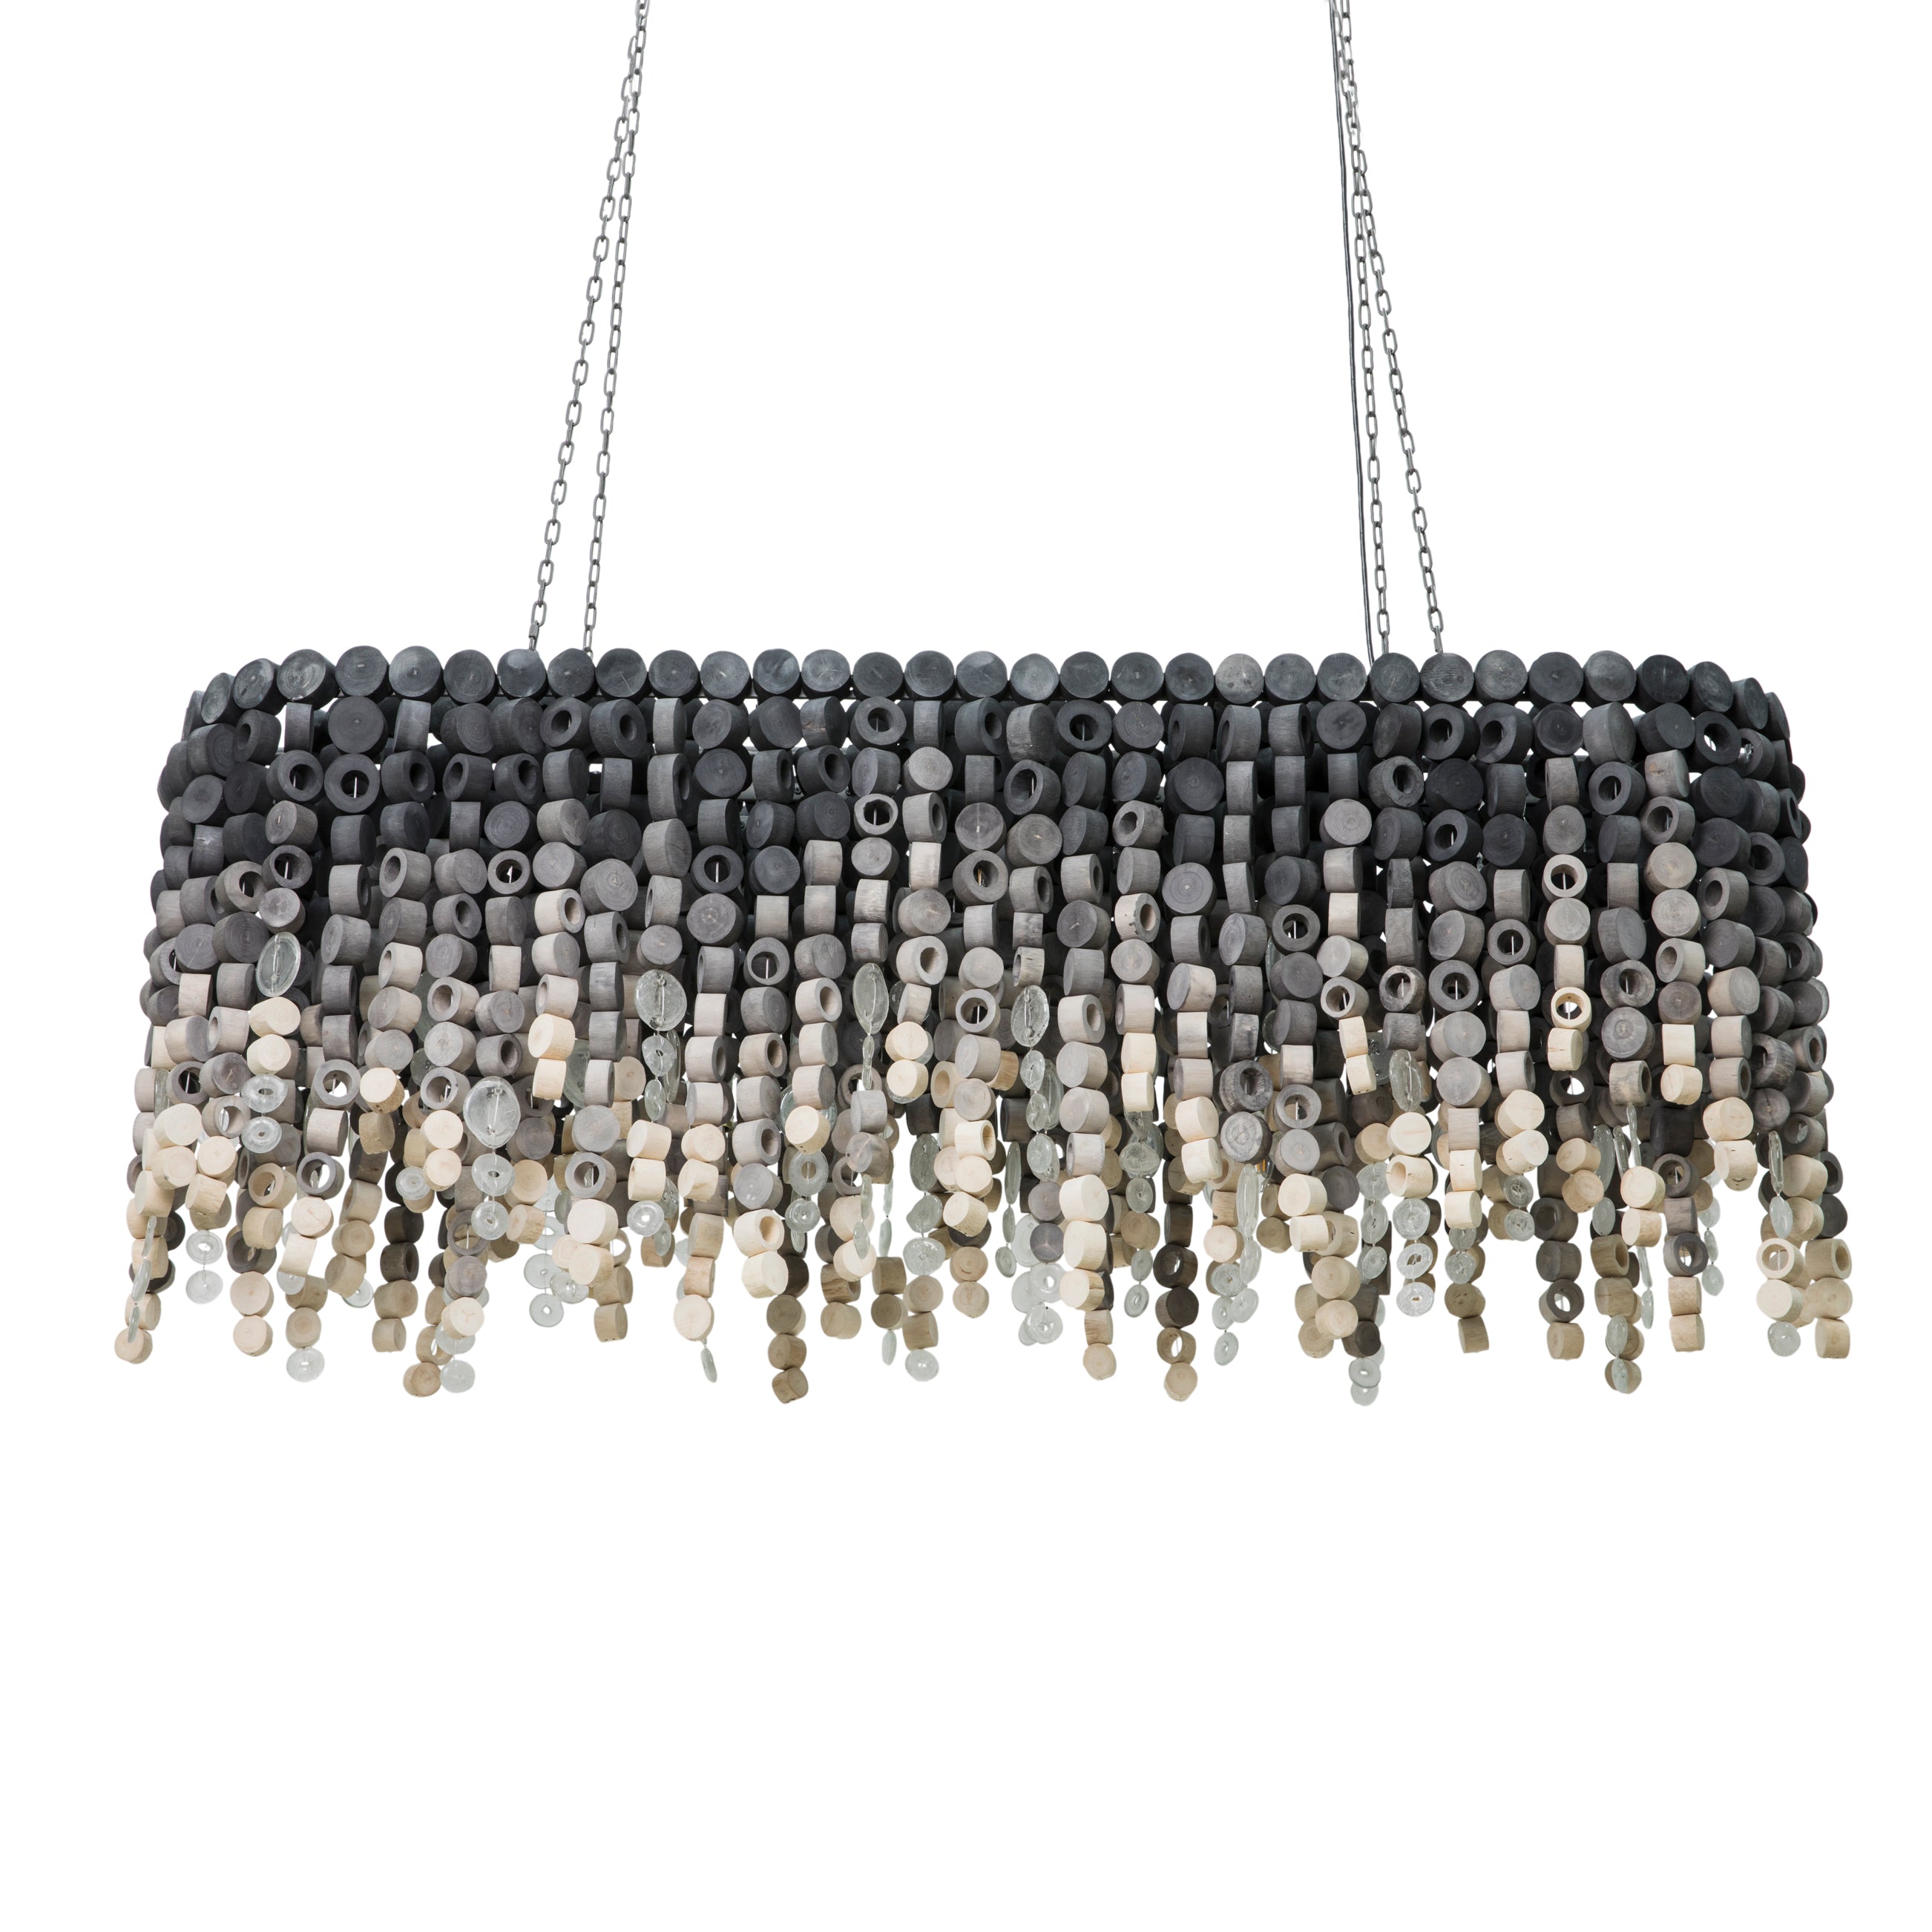 Large Oval Wood Disc Chandelier in Ombre Finish with Recycled Glass